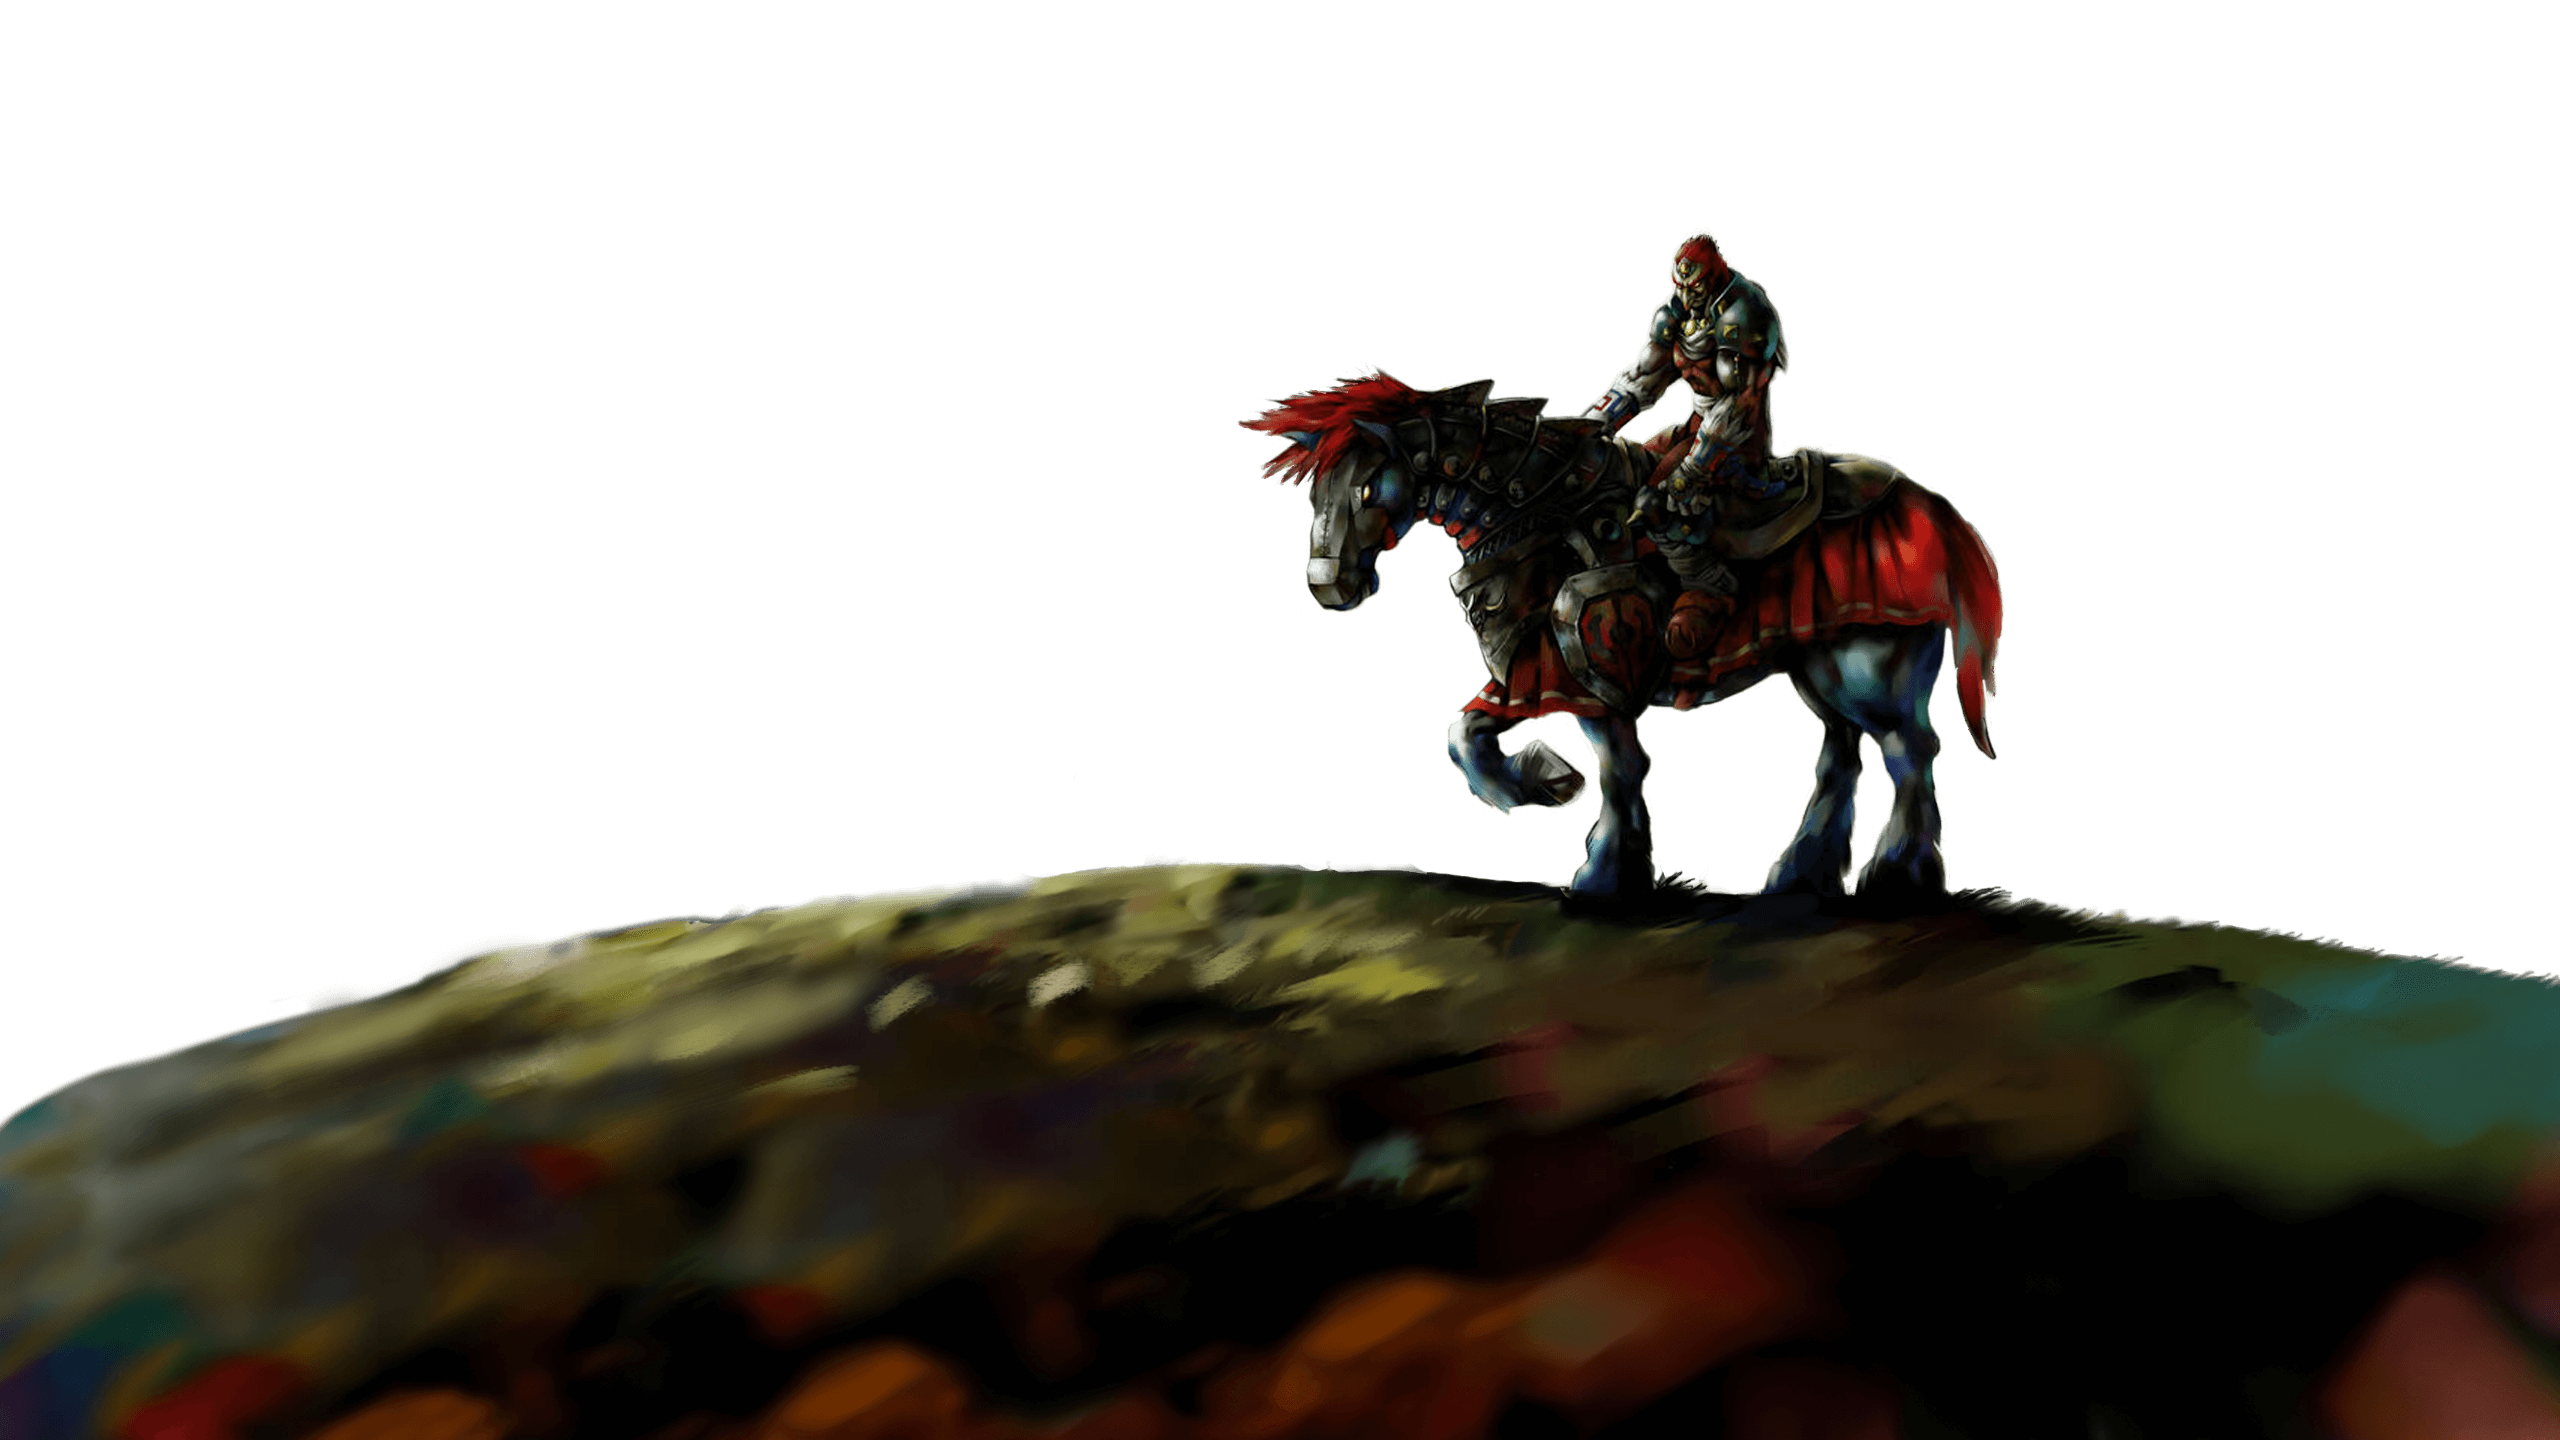 Ganon sitting on his horse atop a hill